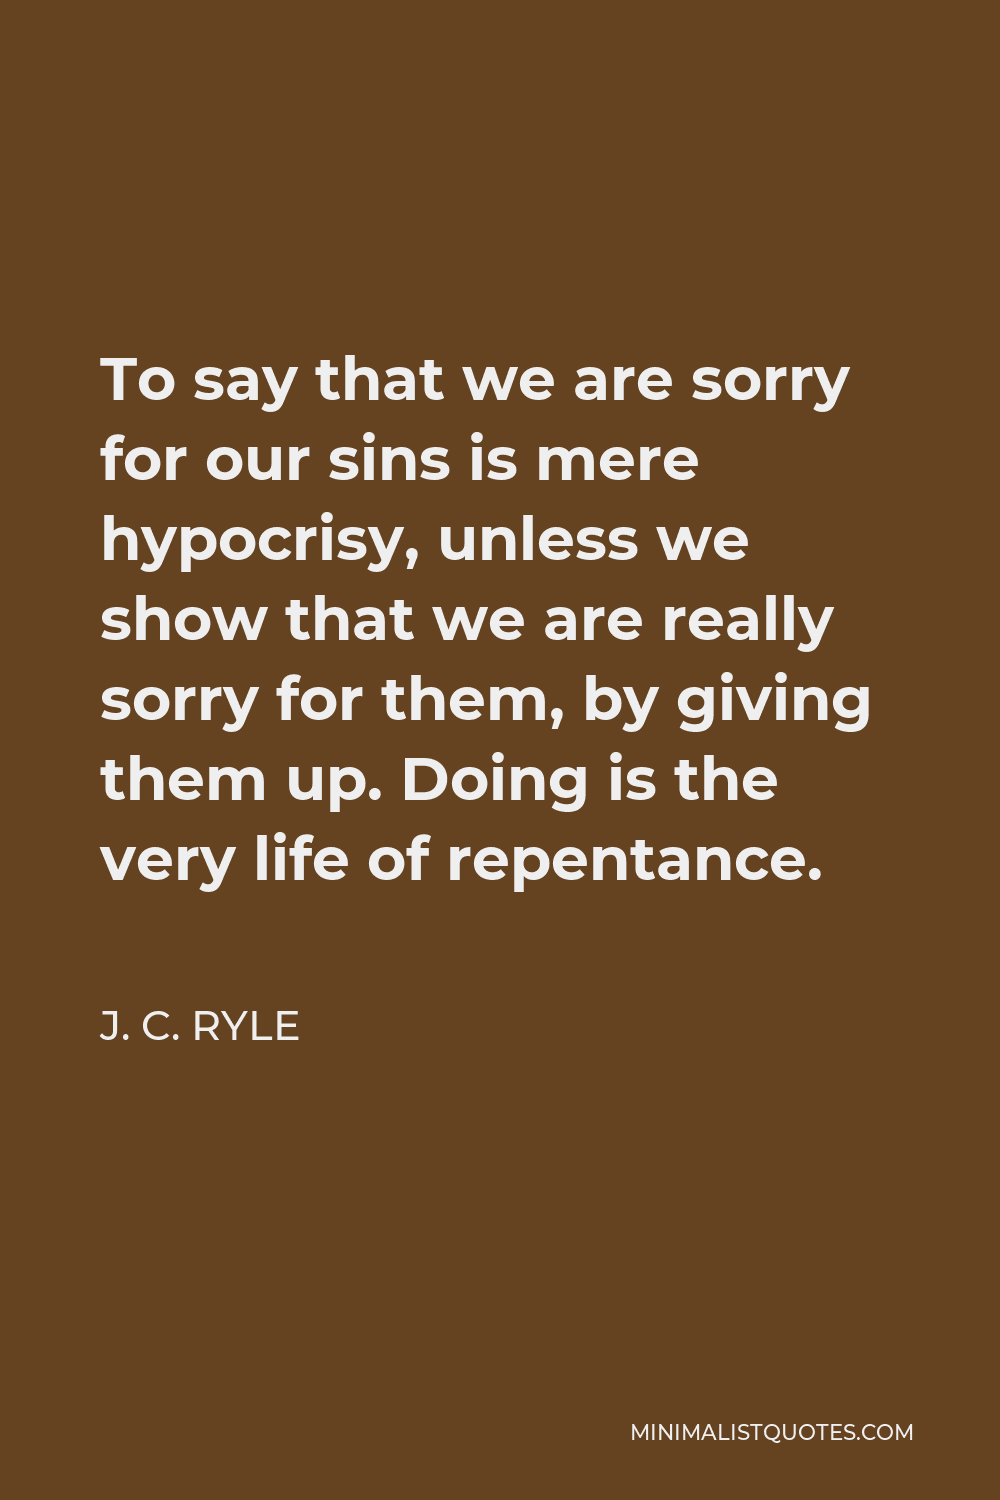 J. C. Ryle Quote - To say that we are sorry for our sins is mere hypocrisy, unless we show that we are really sorry for them, by giving them up. Doing is the very life of repentance.